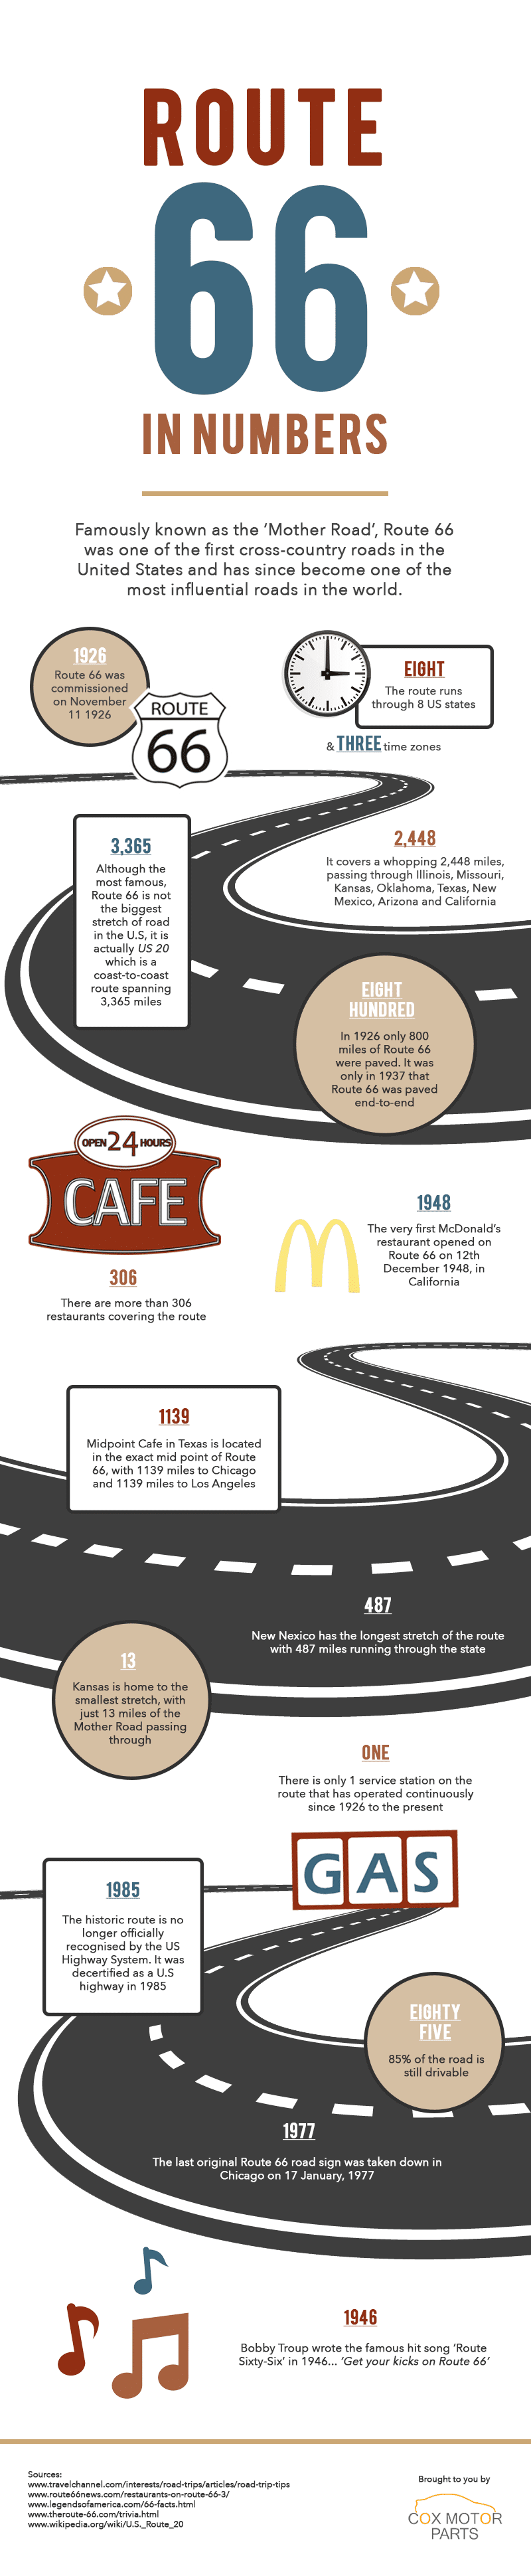 Route 66 In Numbers [Infographic]